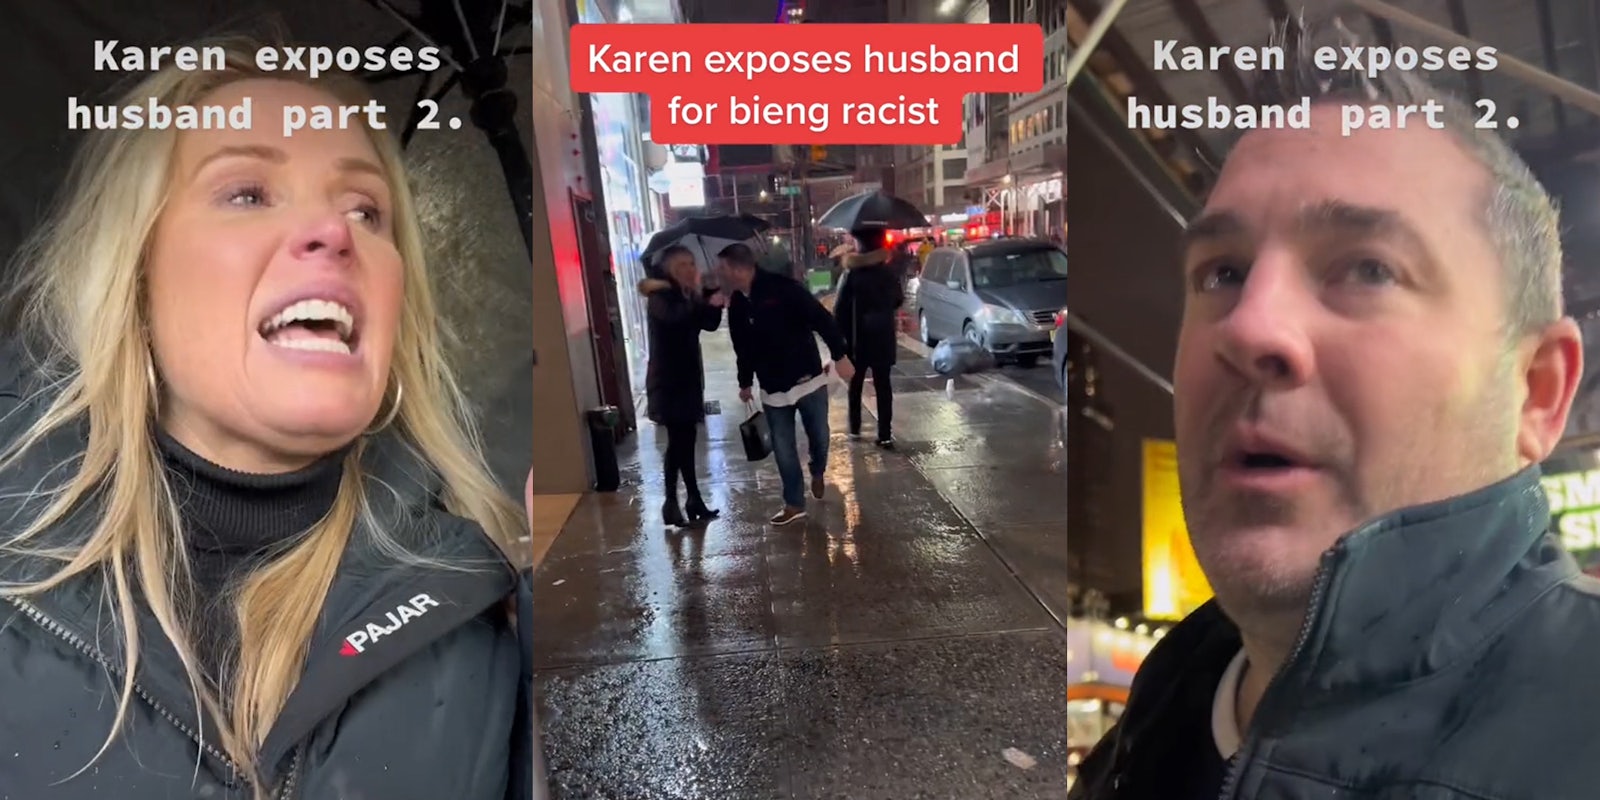 woman holding umbrella speaking caption 'Karen exposes husband part 2.' (l) man and women holding umbrella walking on sidewalk caption 'Karen exposes husband for being racist' (c) man speaking outside caption 'Karen exposes husband part 2.' (r)